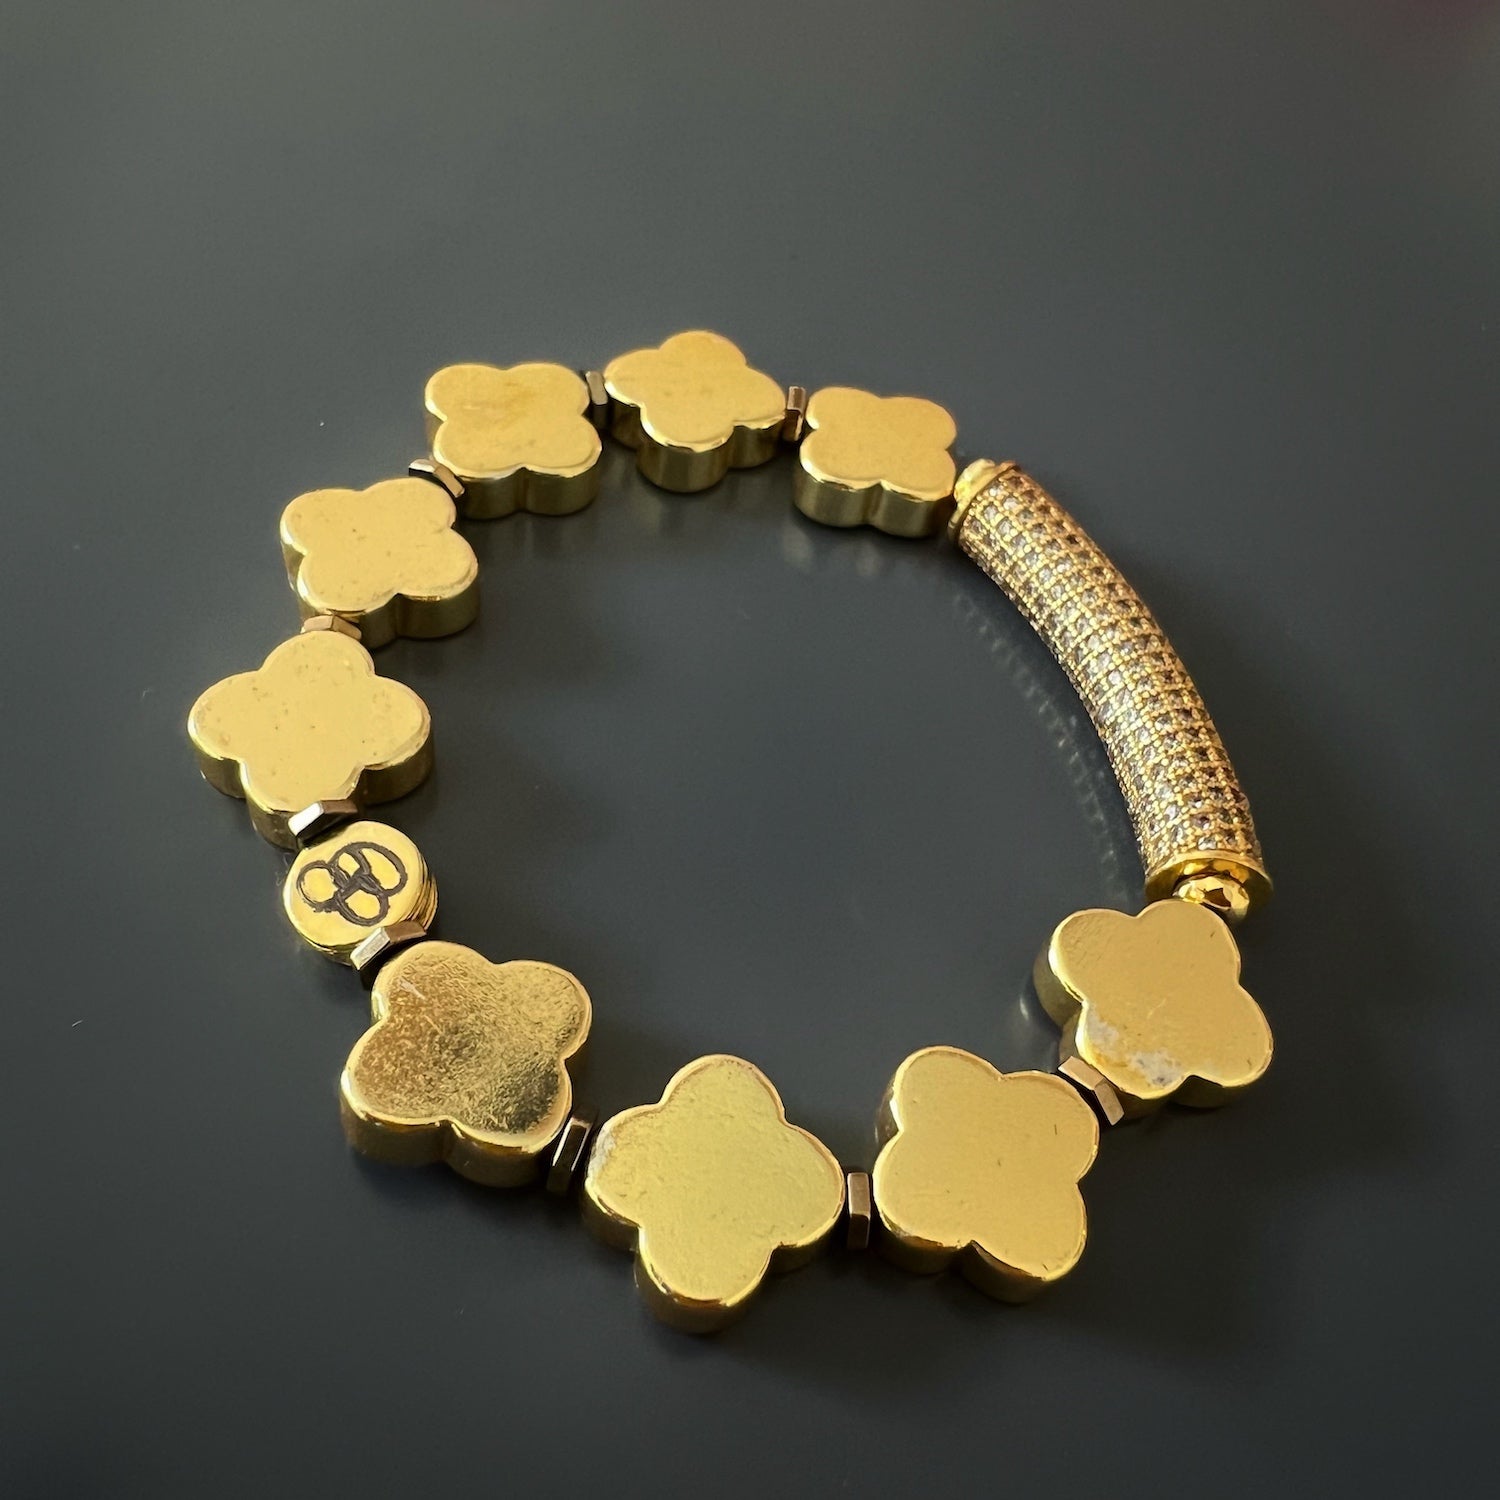 The Diamond and Gold Clover Bracelet laid flat on a surface, displaying its exquisite craftsmanship and the charming arrangement of the gold clover beads.